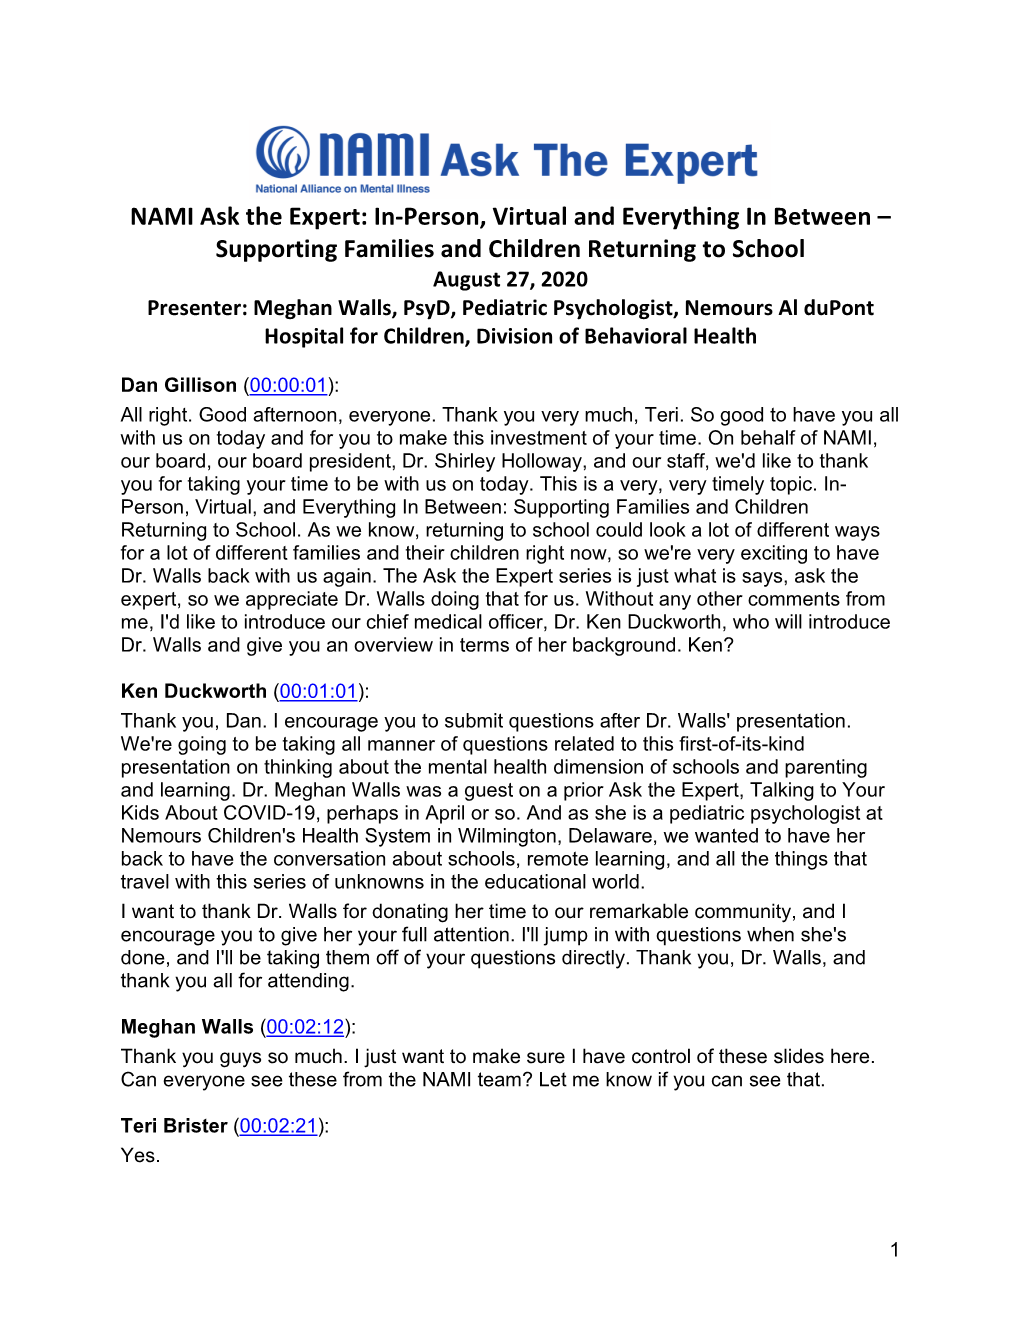 NAMI Ask the Expert: In-Person, Virtual and Everything in Between